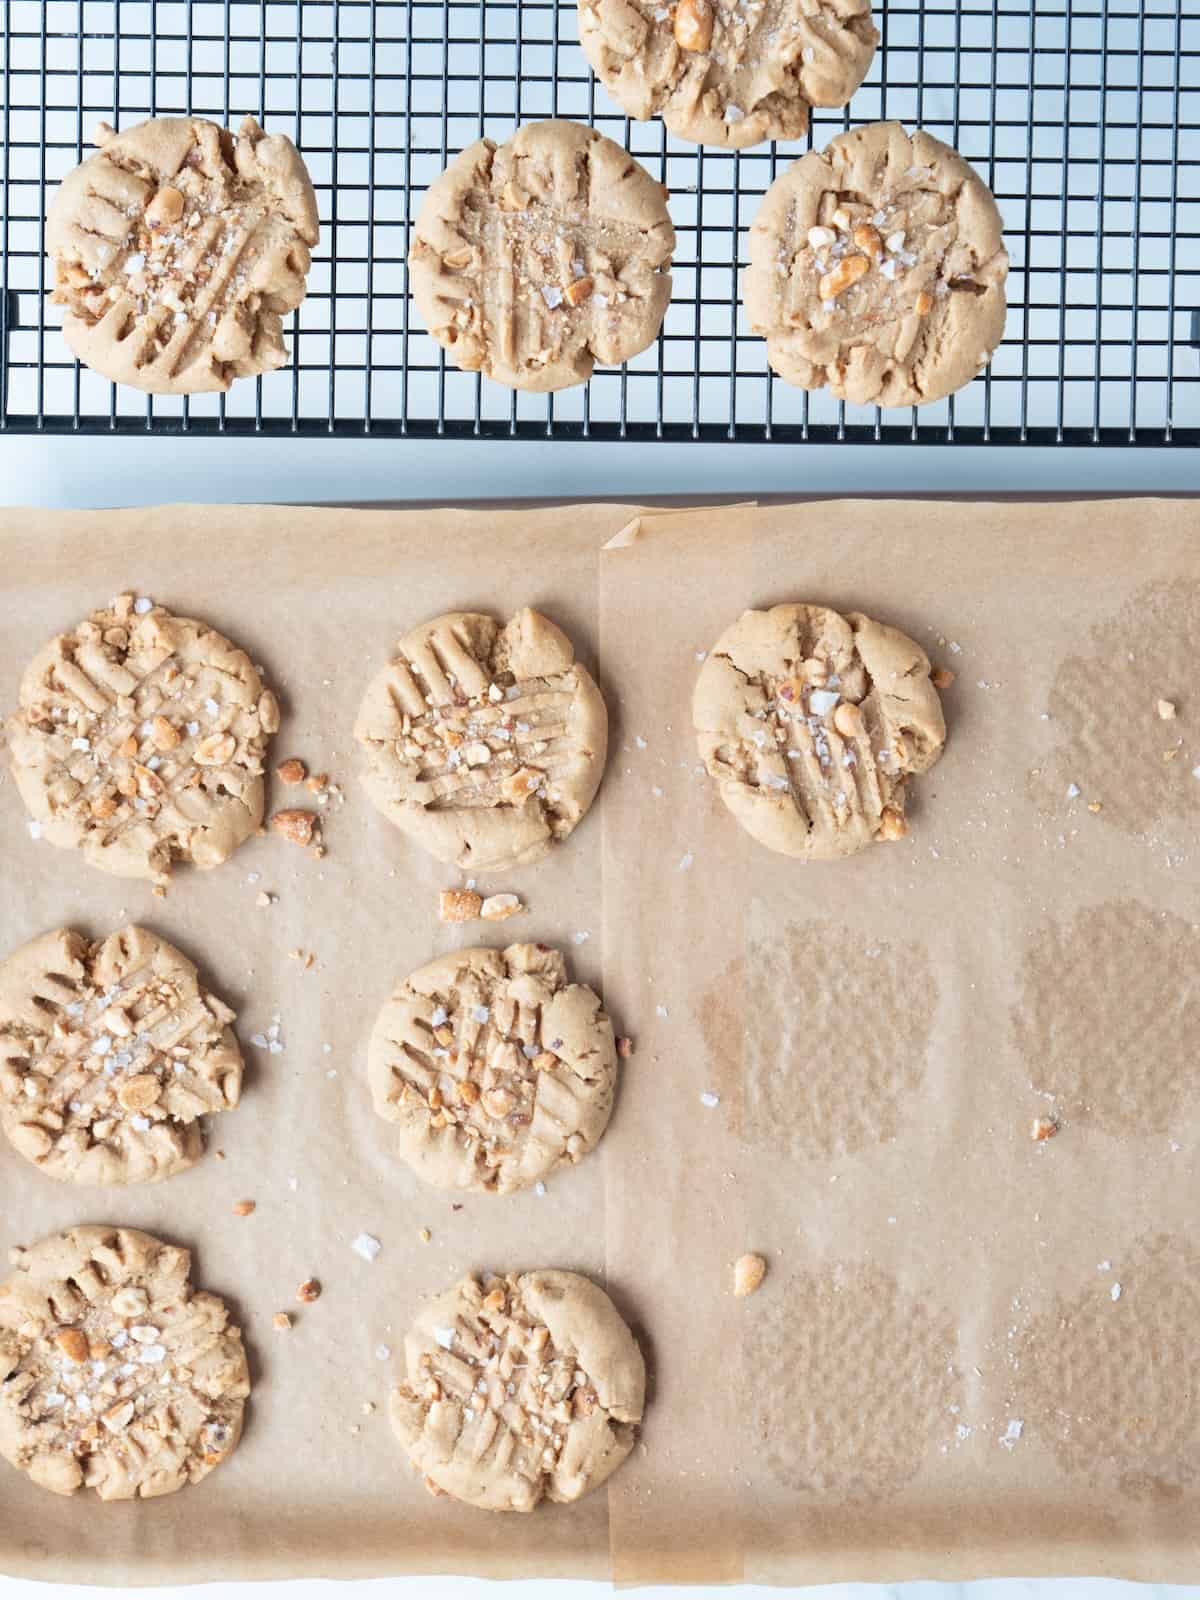 A wire rack along with a parchment-lined baking sheet, both with peanut butter cookies and a few crumbs and peanuts on the parchment.